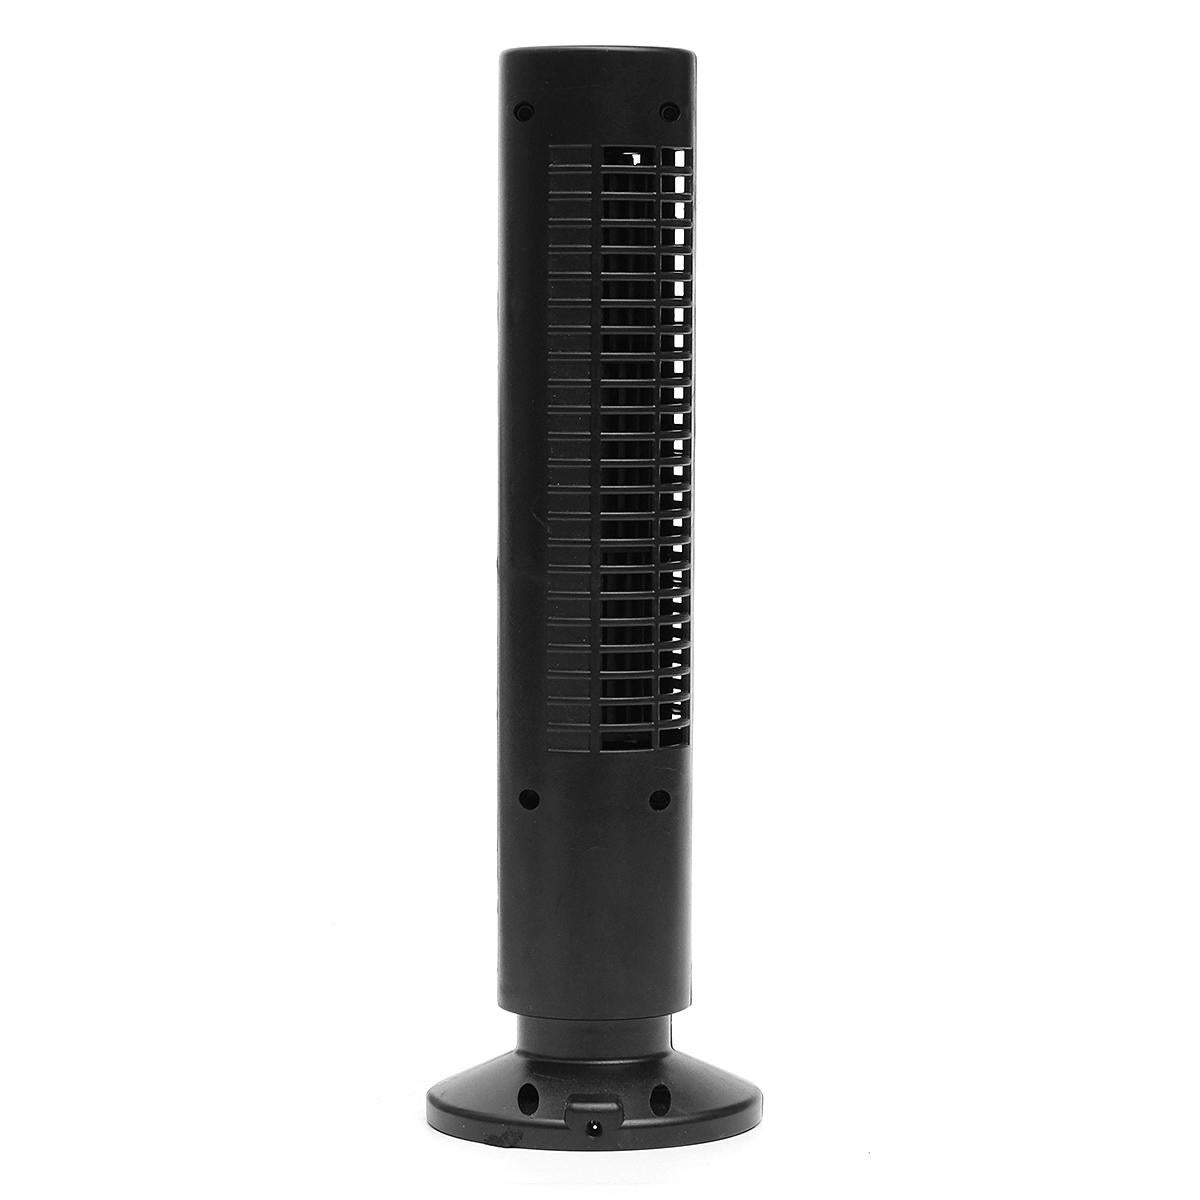 5V 2.5W Mini Usb Cooling Air Conditioner Purifier Tower Bladeless Desk Fan